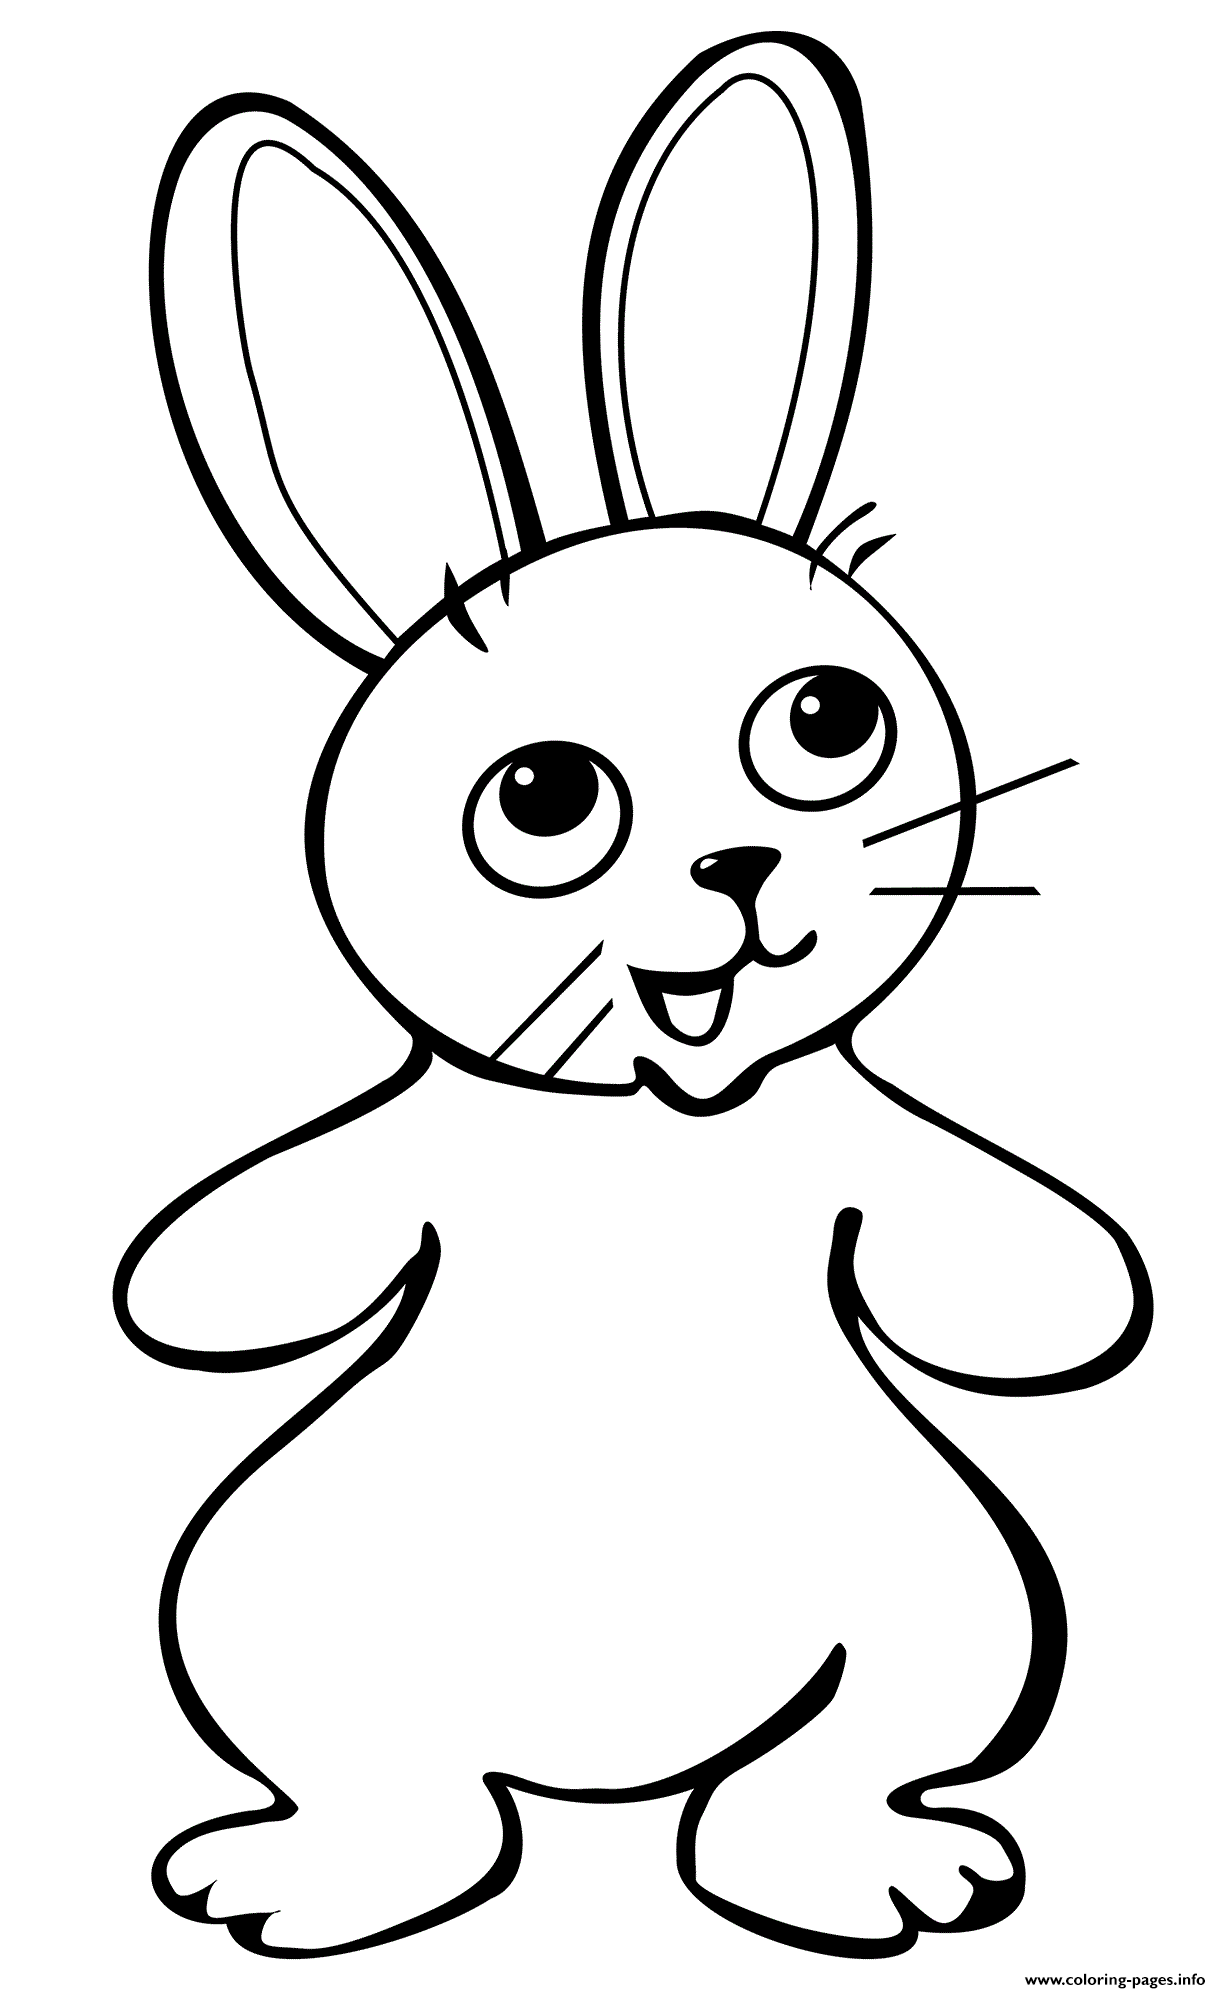 Bunny Rabbit For Kids coloring